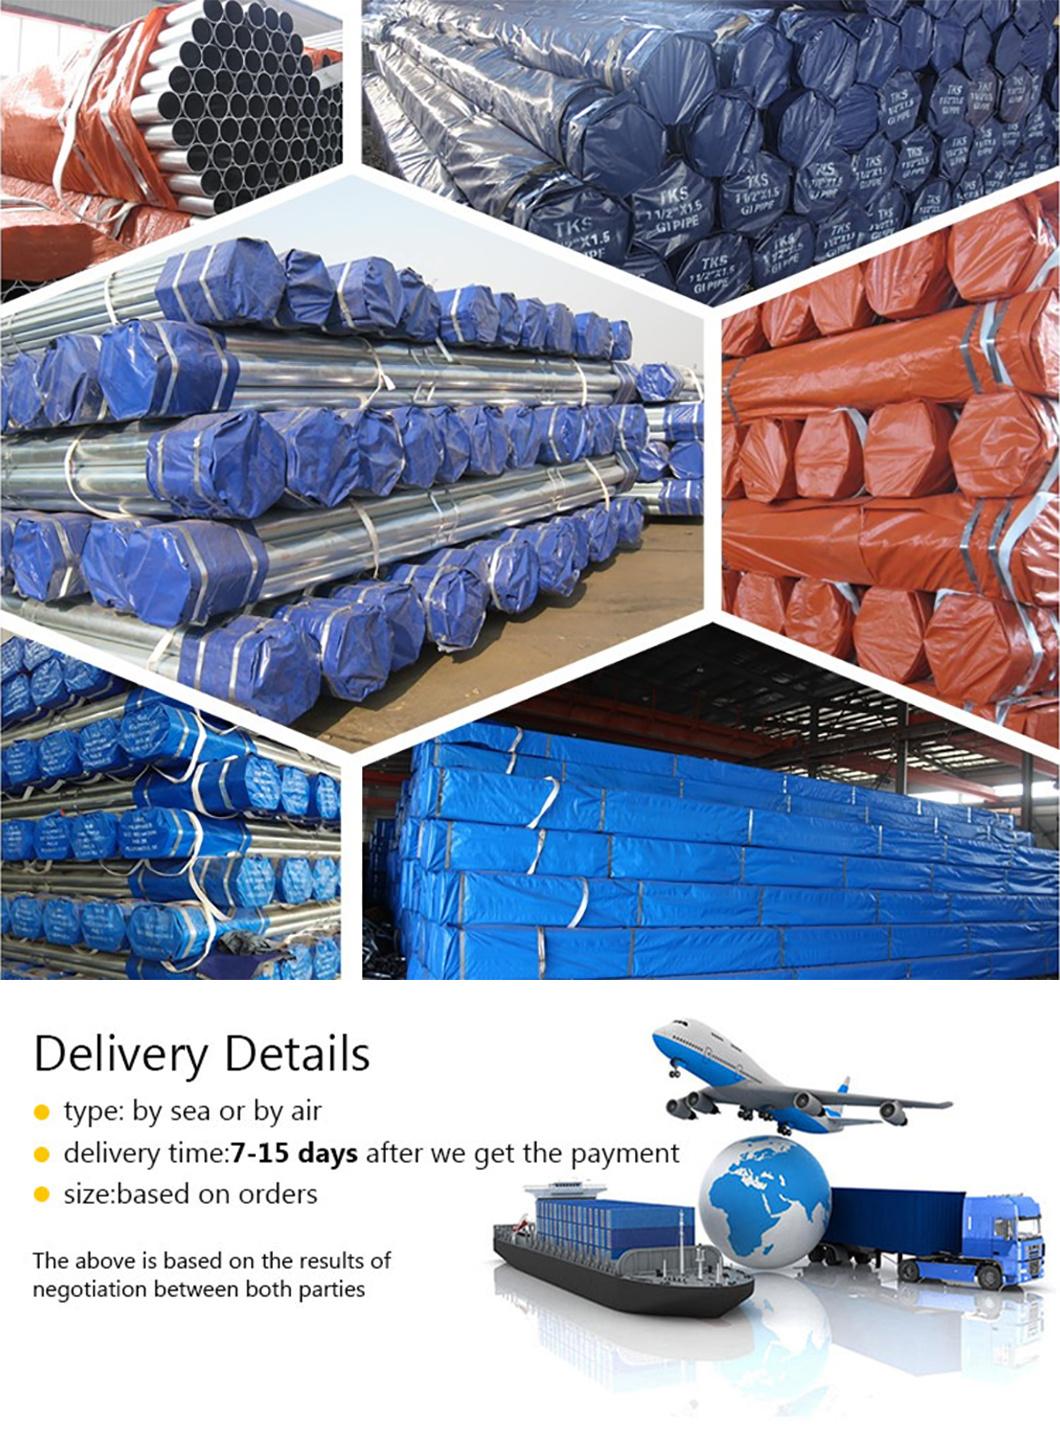 China Factory Direct Sale 304 201 Stainless Steel Decorate Pipe